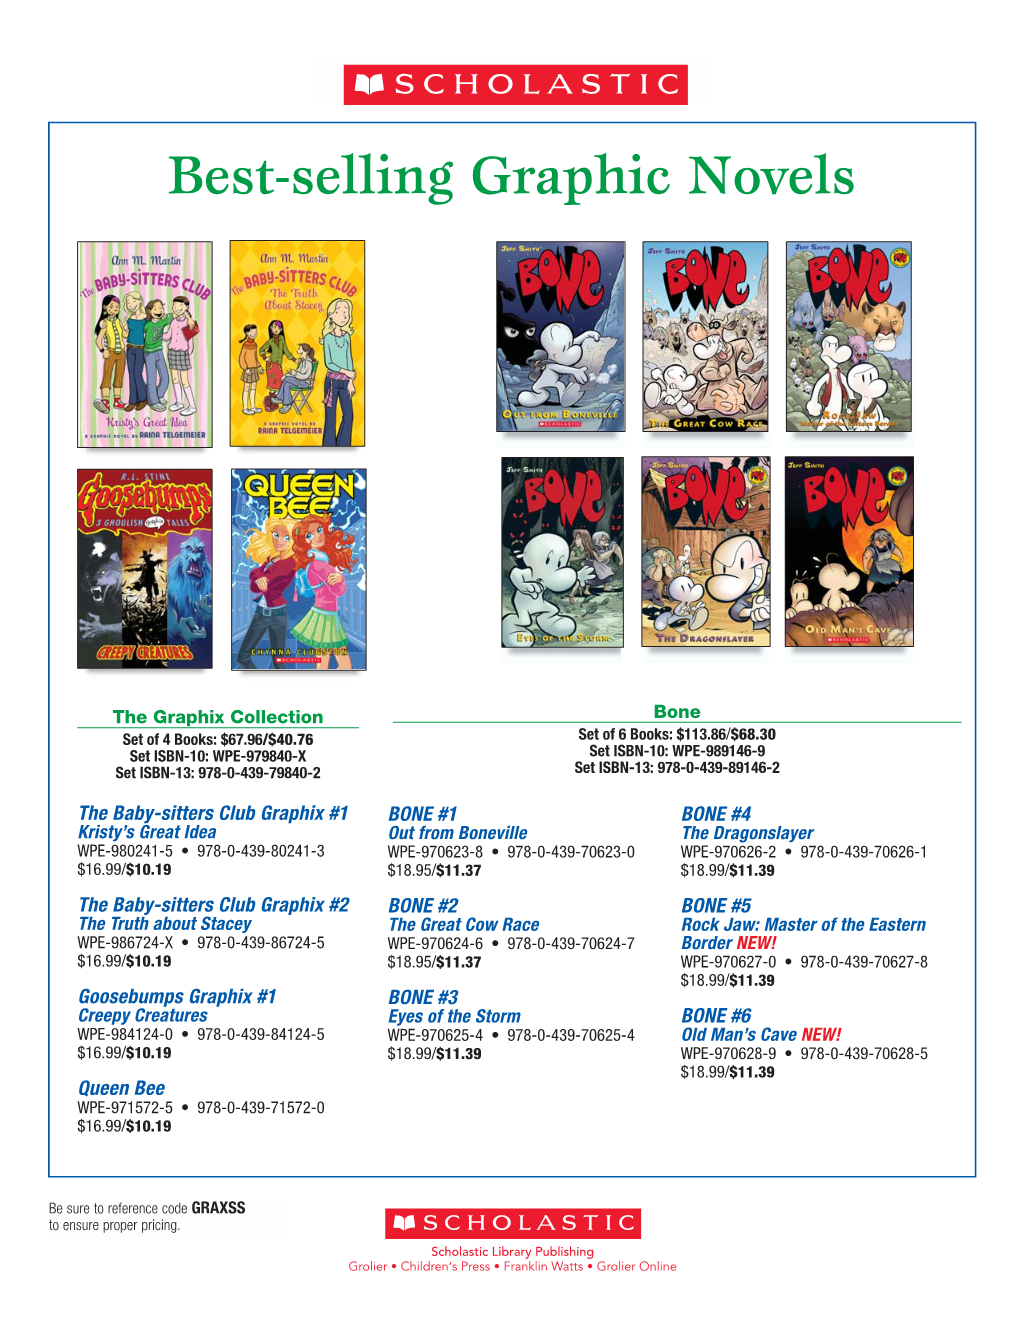 Best-Selling Graphic Novels